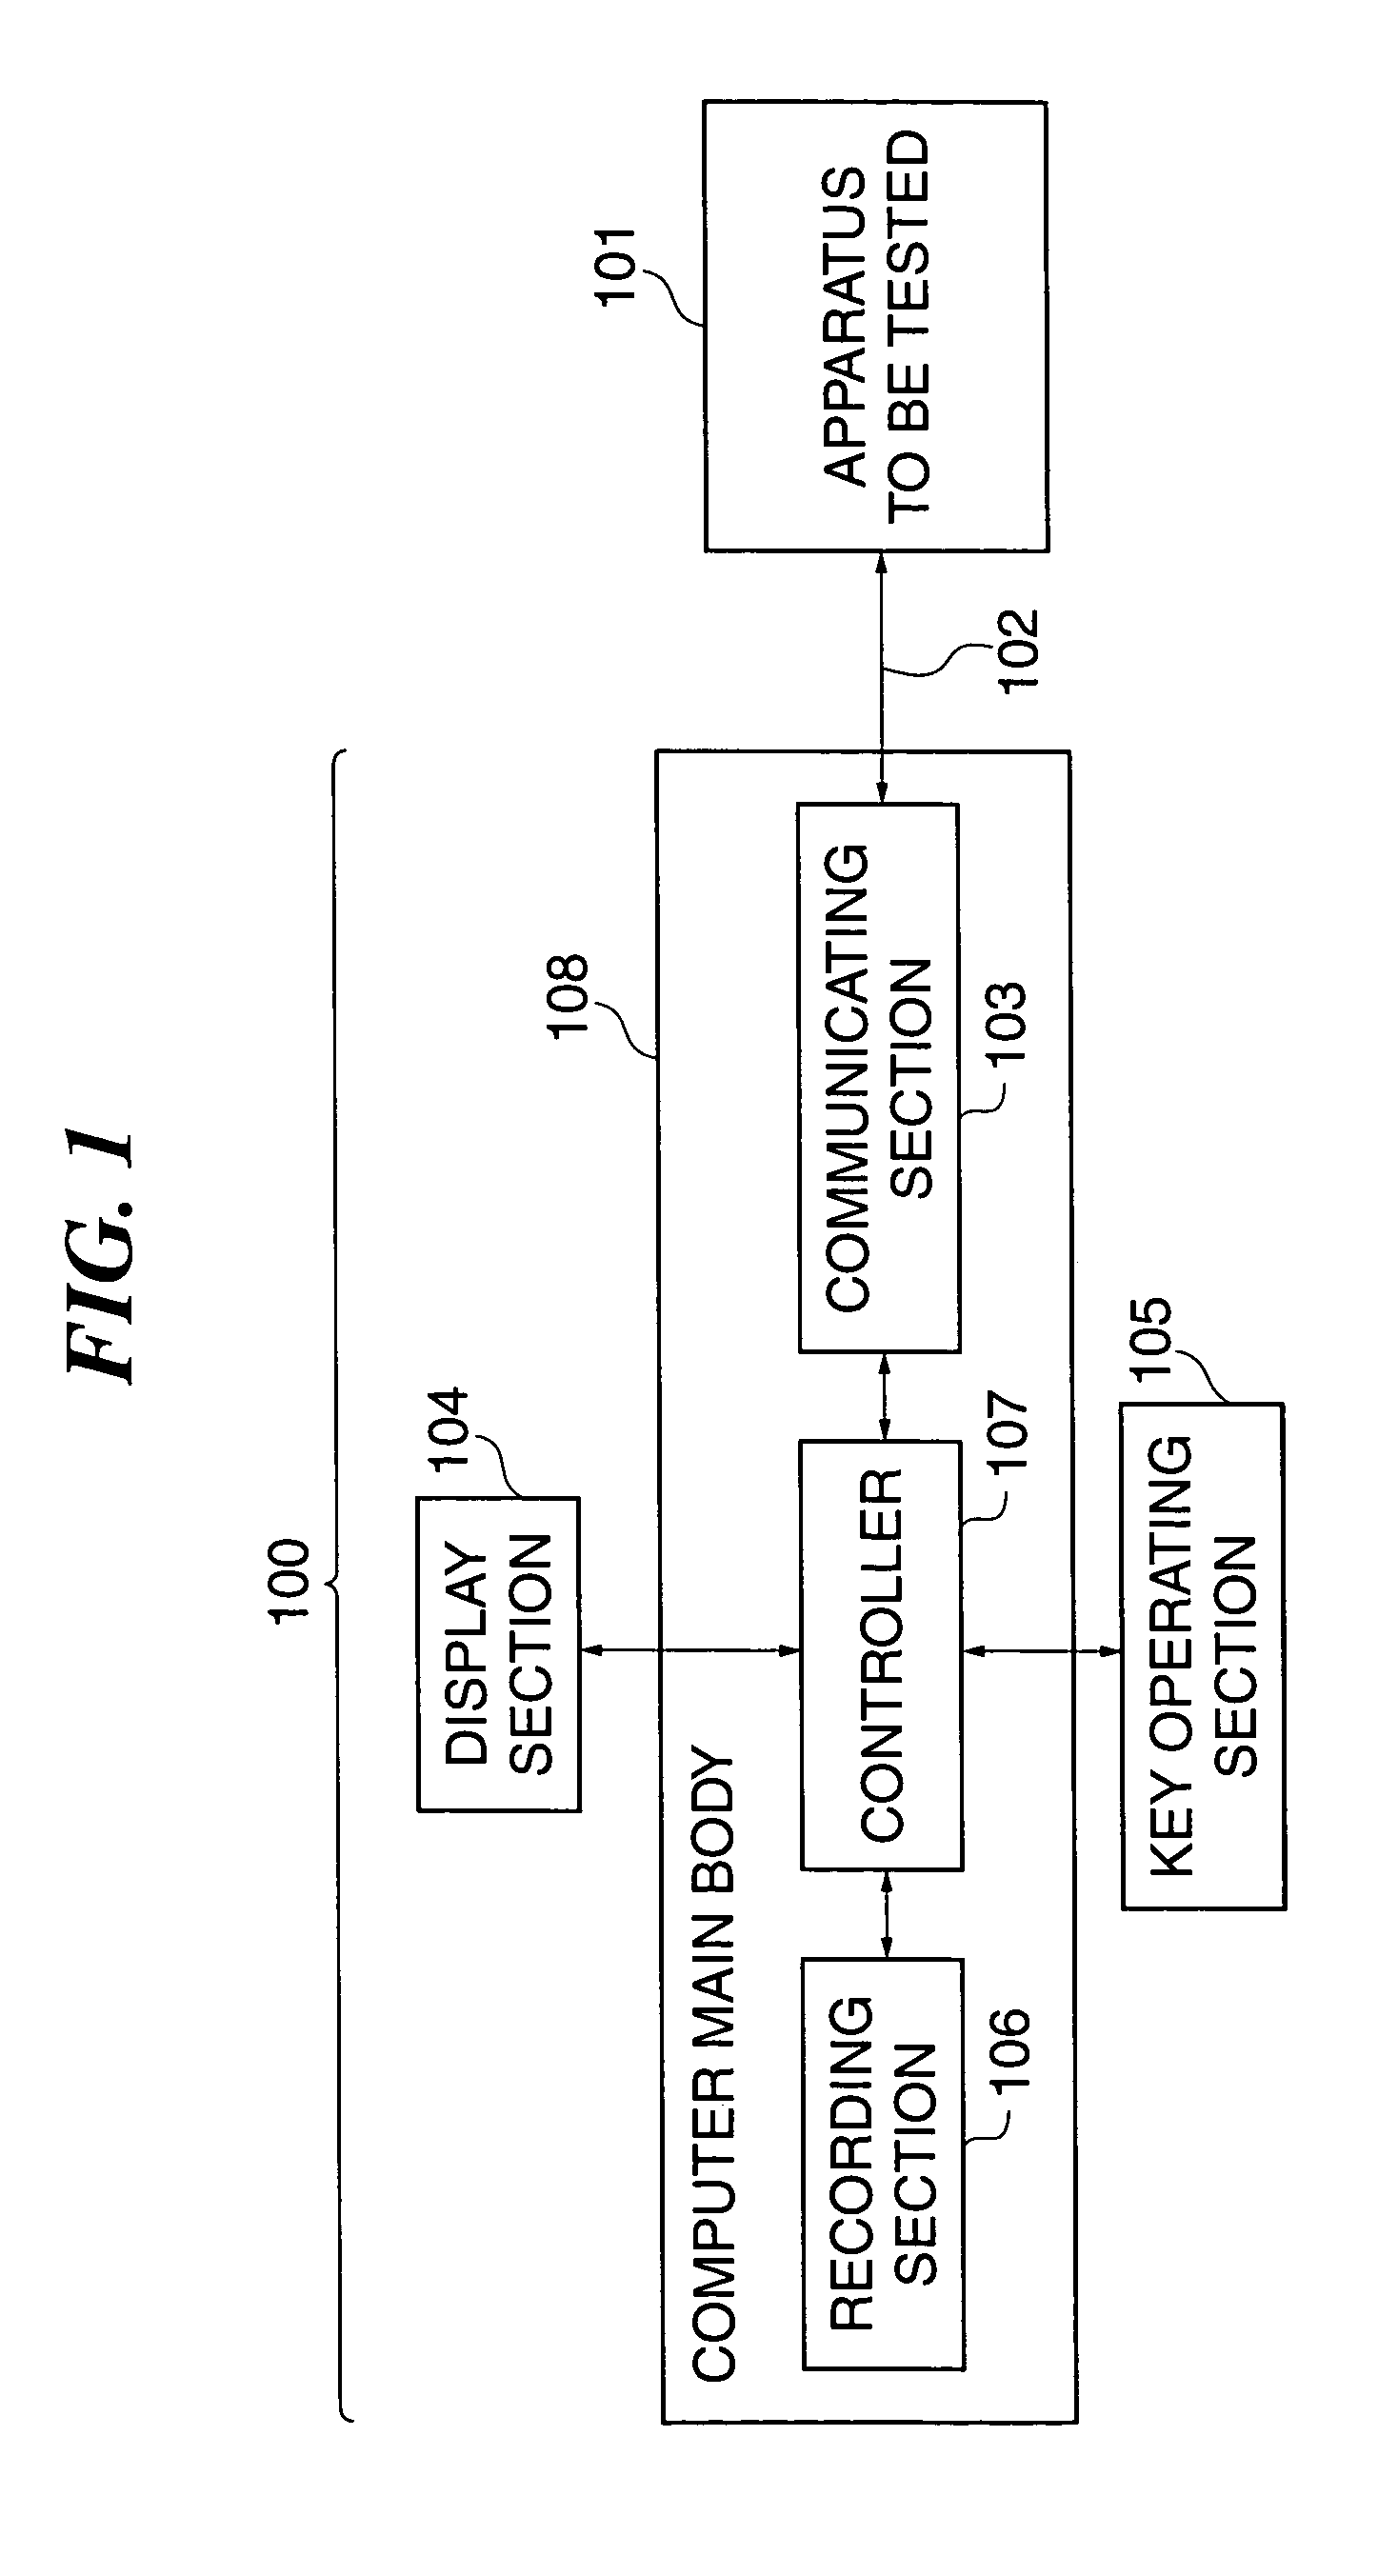 Testing apparatus, method of controlling the same, and program for implementing the method